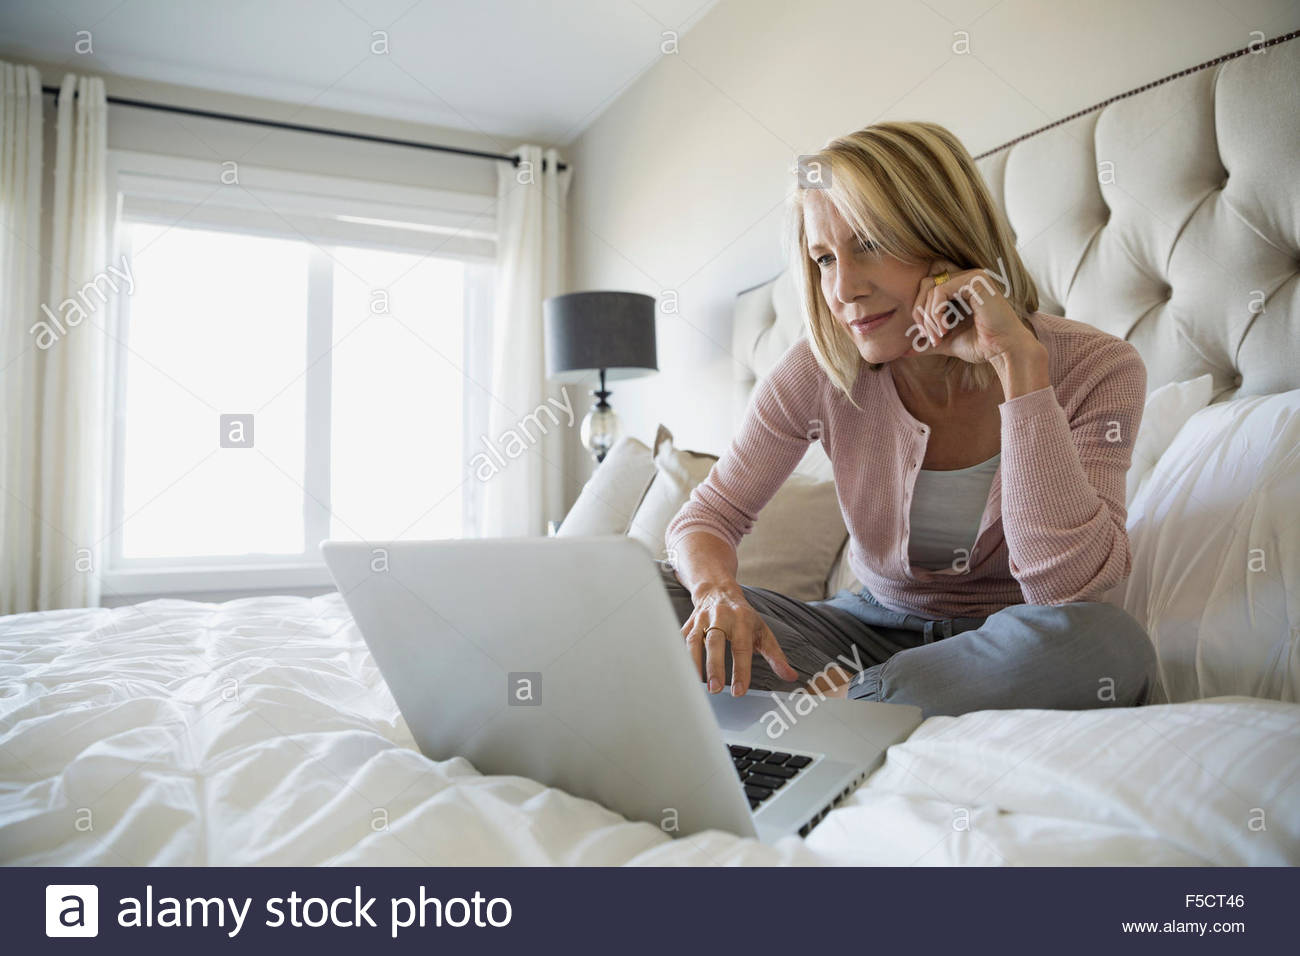 Woman using laptop in bed Stock Photo